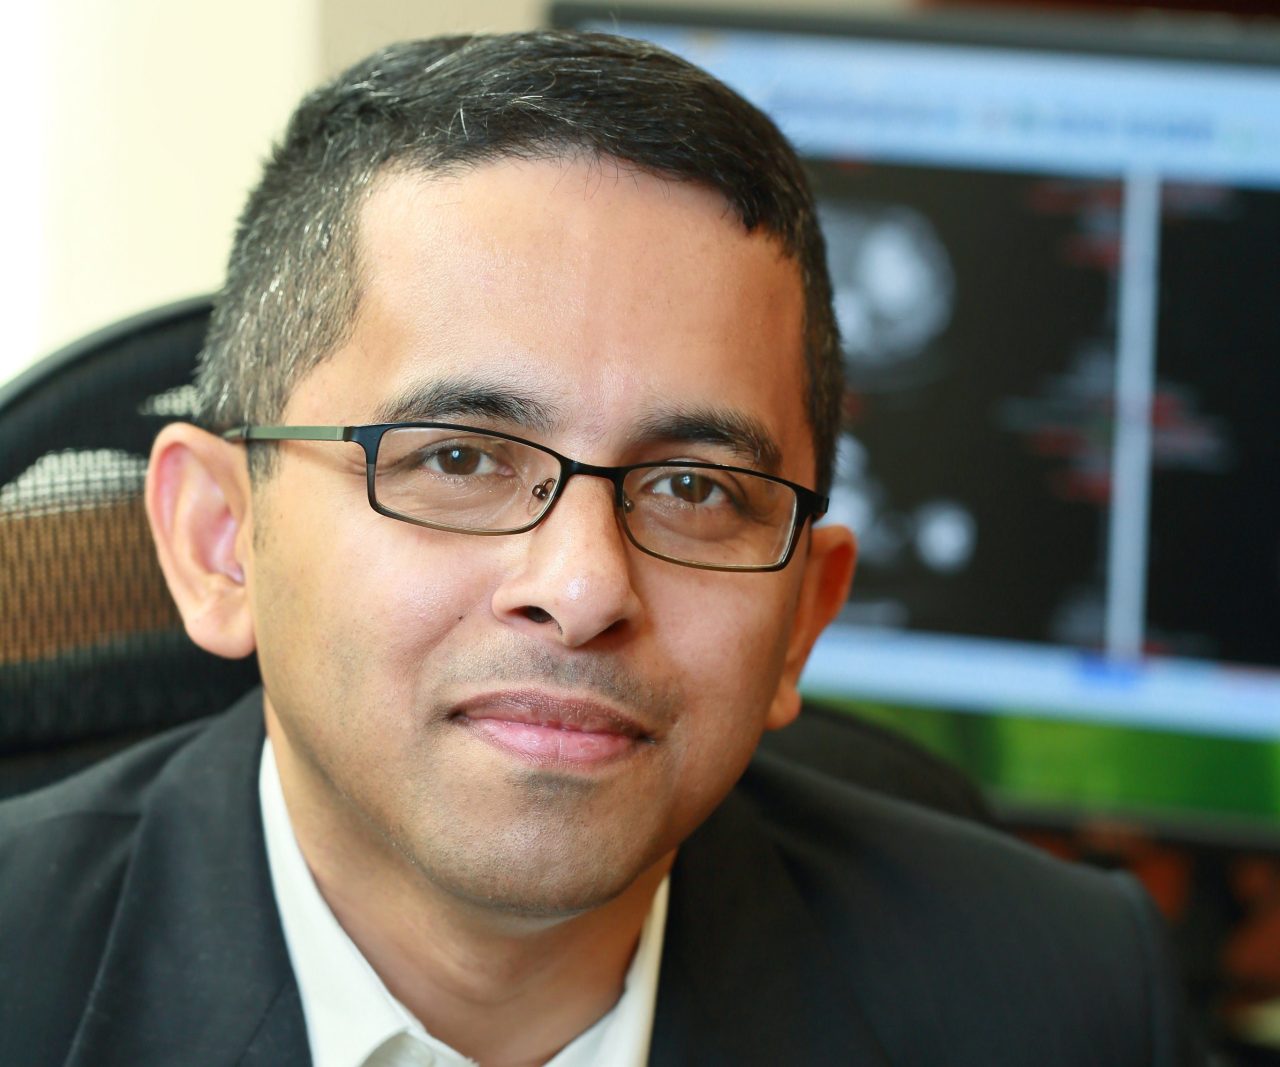 Doctor Anish Thomas was awarded tenure at NIH Intramural Research Program